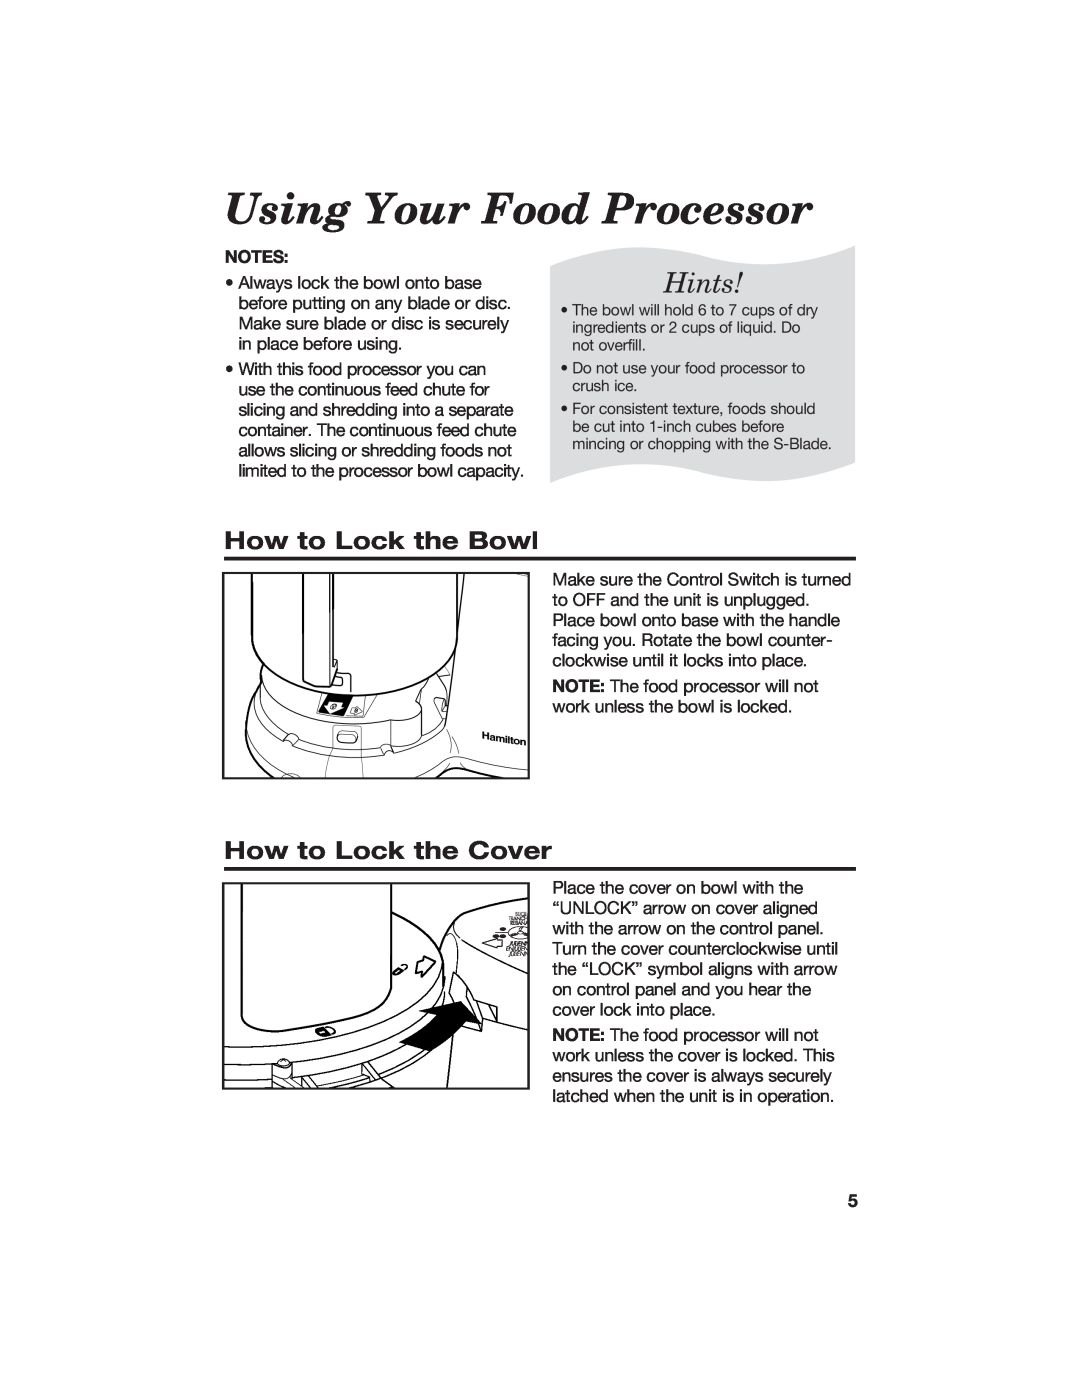 Hamilton Beach 840067400 manual Using Your Food Processor, Hints, How to Lock the Bowl, How to Lock the Cover 